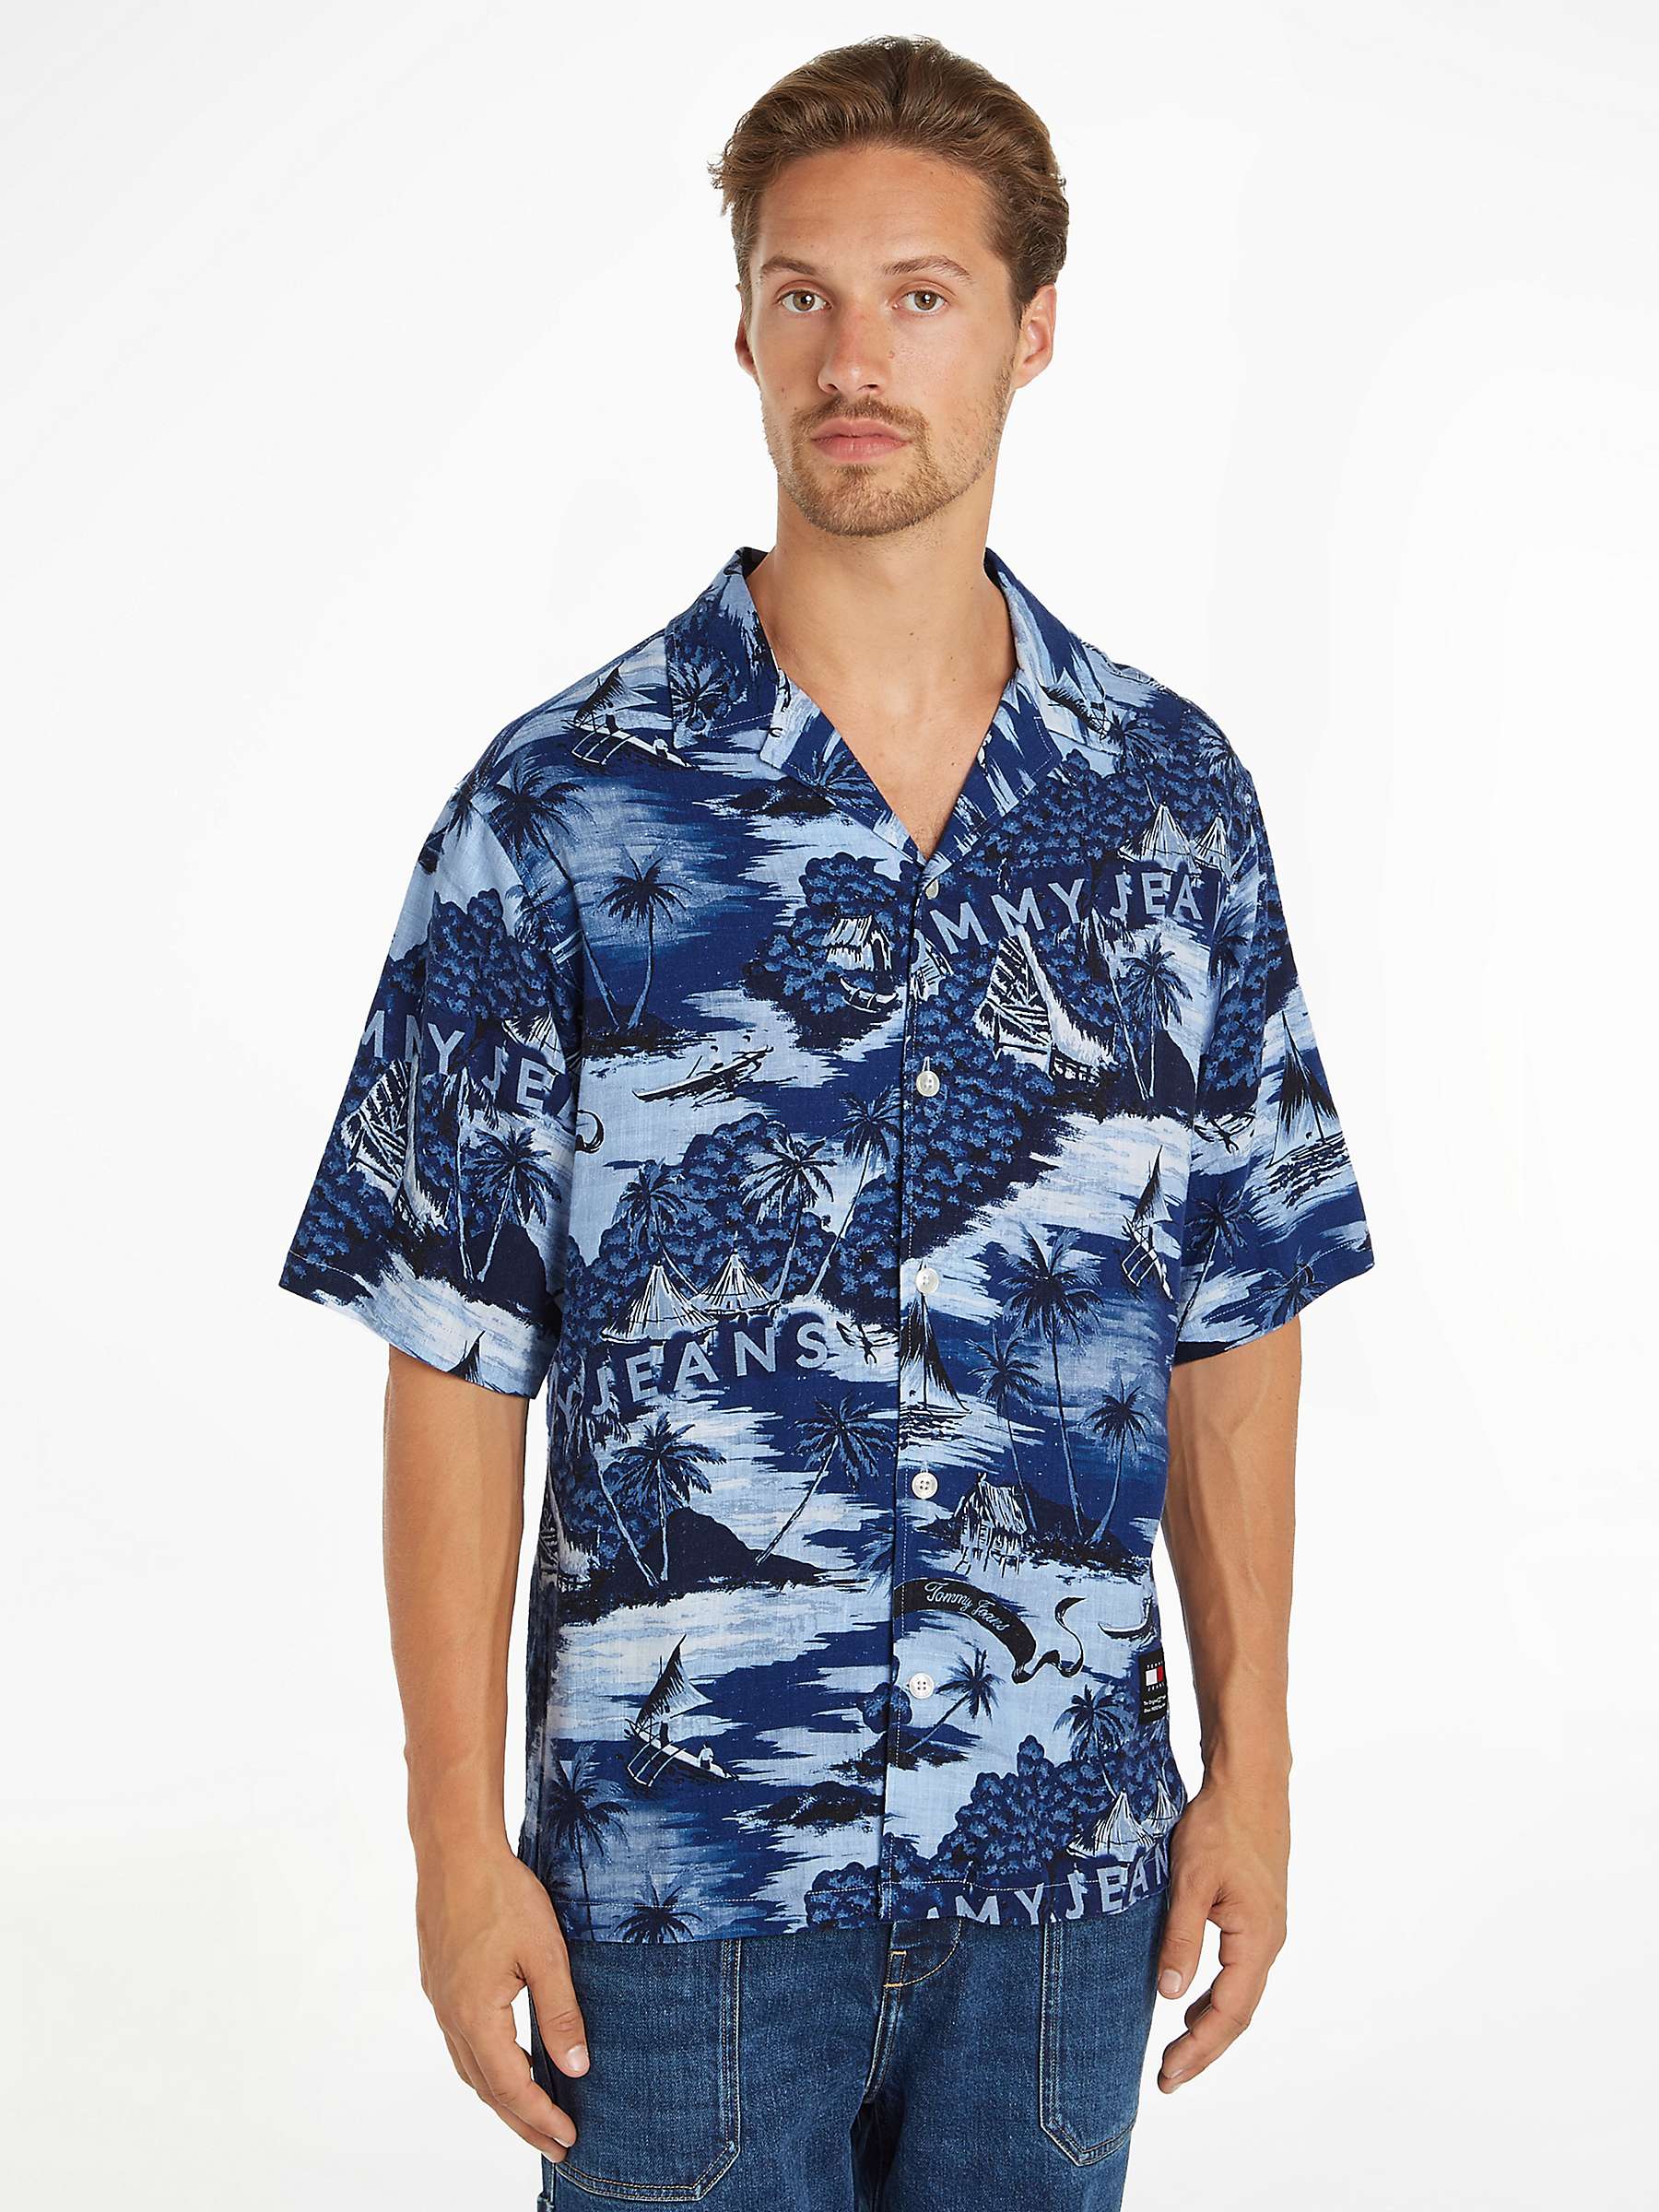 Buy Tommy Jeans Hawaiian Print Camp Shirt, Blue/Multi Online at johnlewis.com